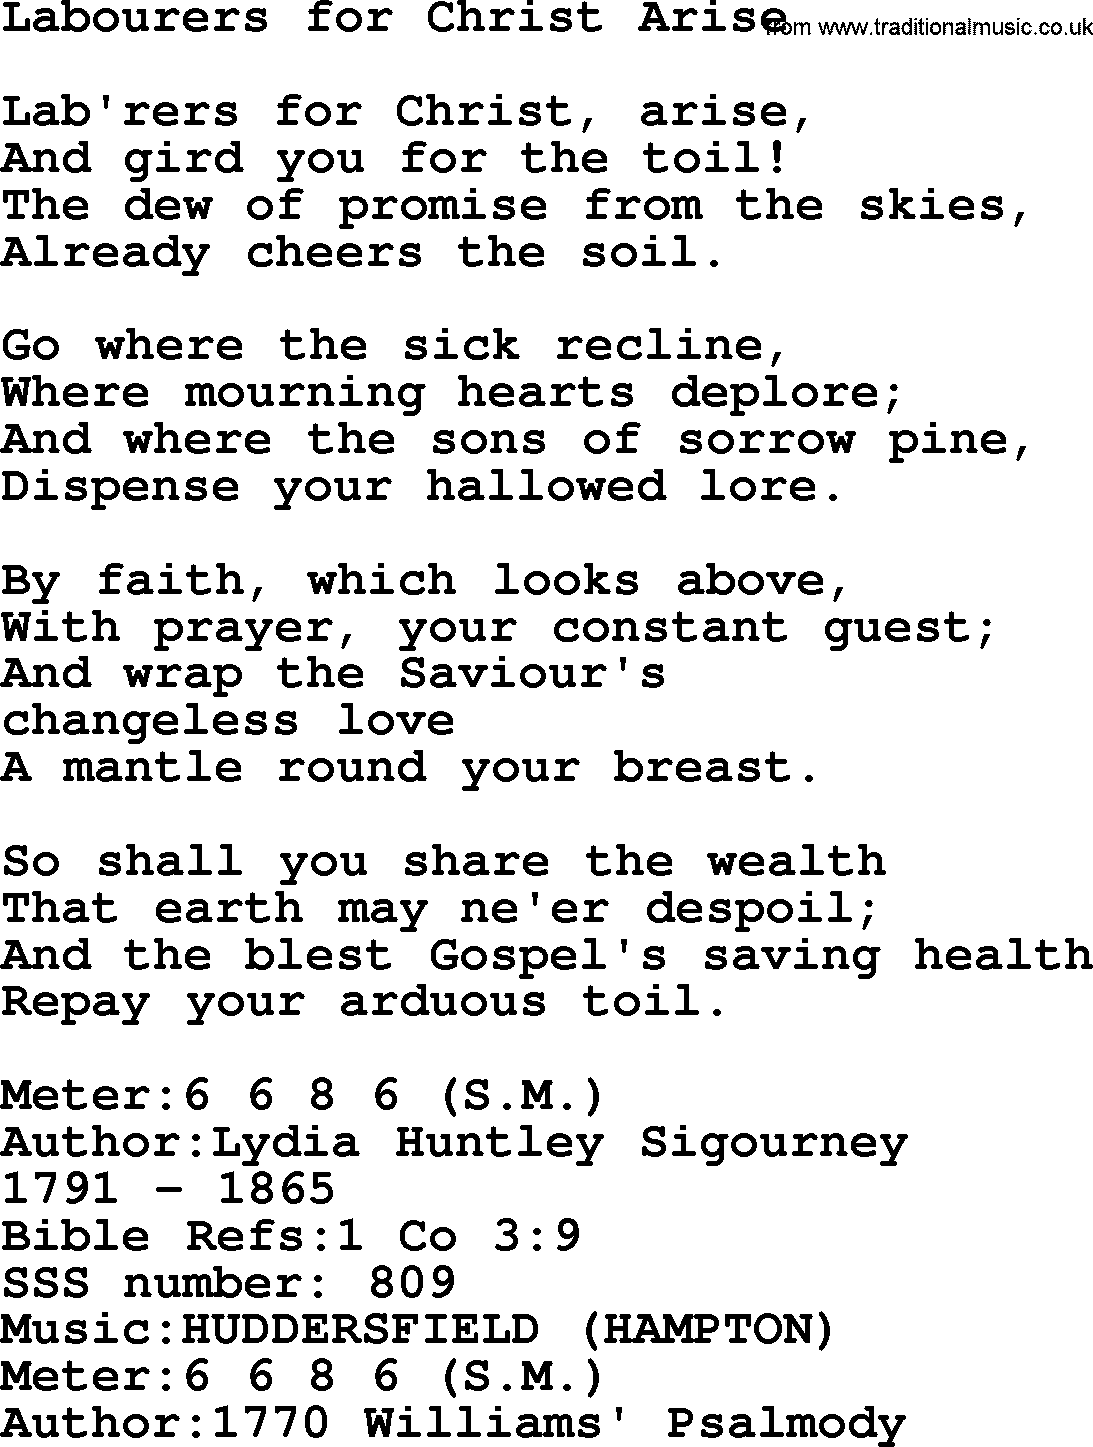 Sacred Songs and Solos complete, 1200 Hymns, title: Labourers For Christ Arise, lyrics and PDF